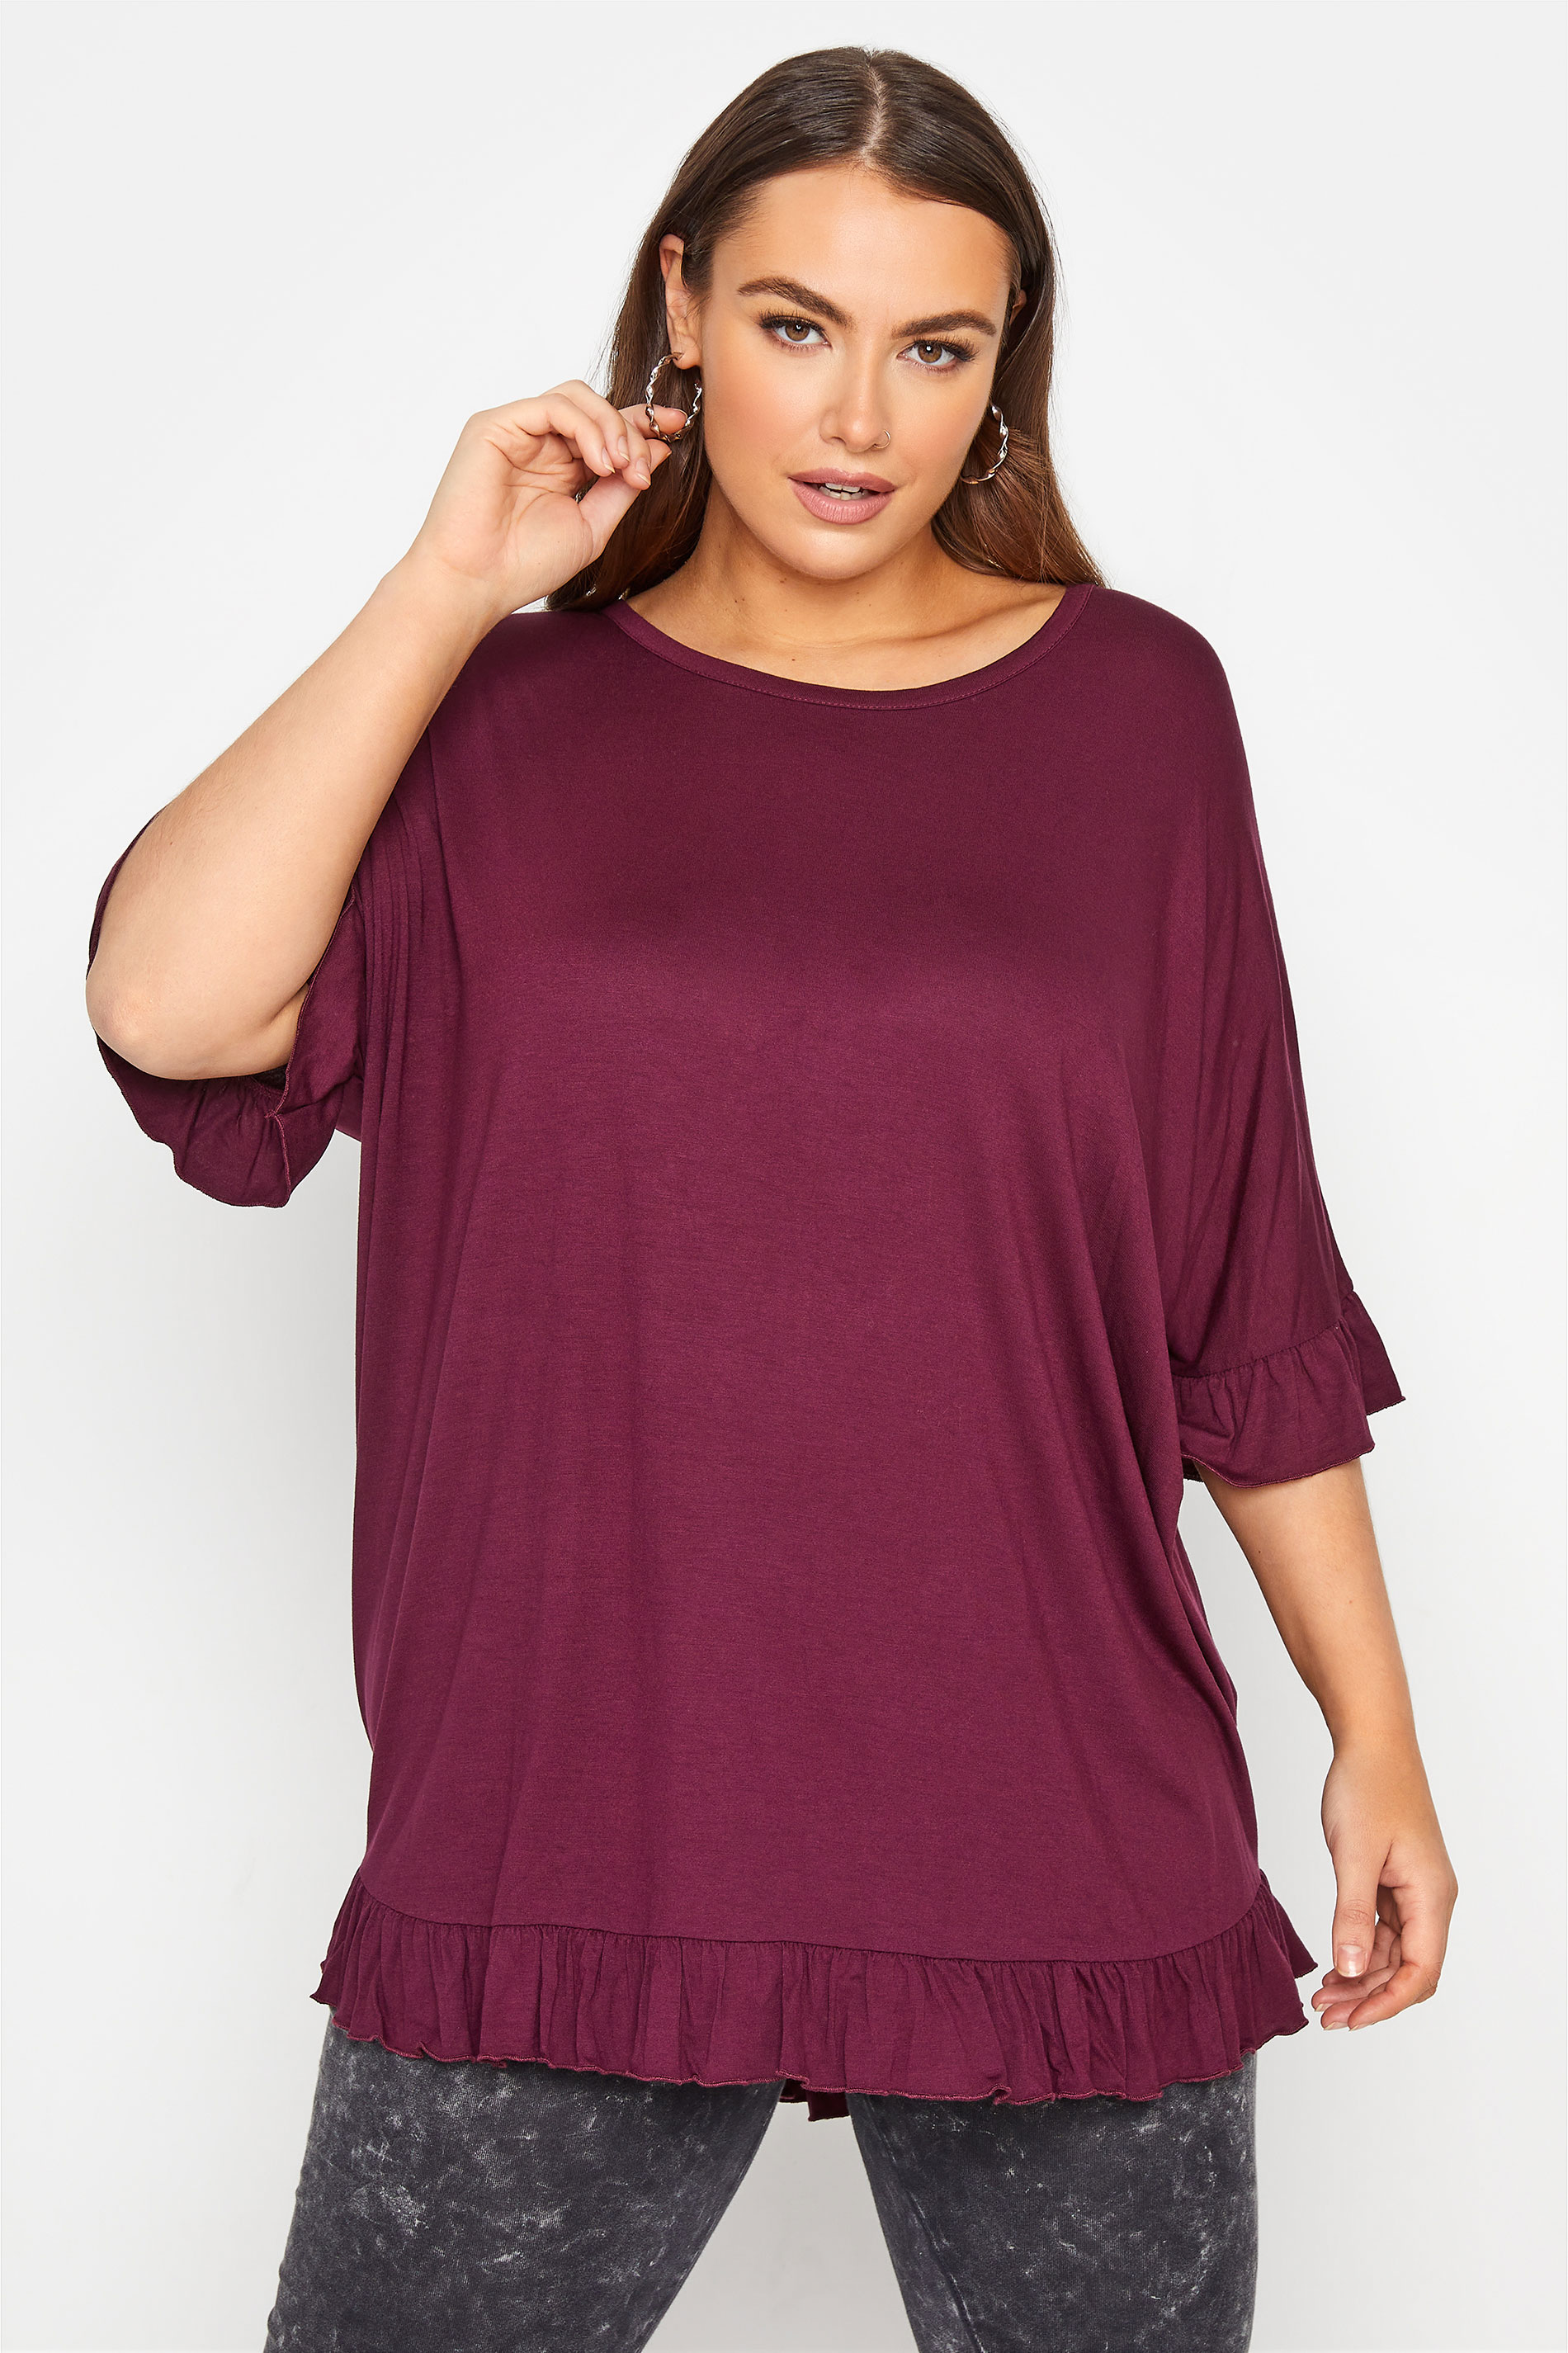 LIMITED COLLECTION Berry Purple Frill Jersey T-Shirt_A.jpg